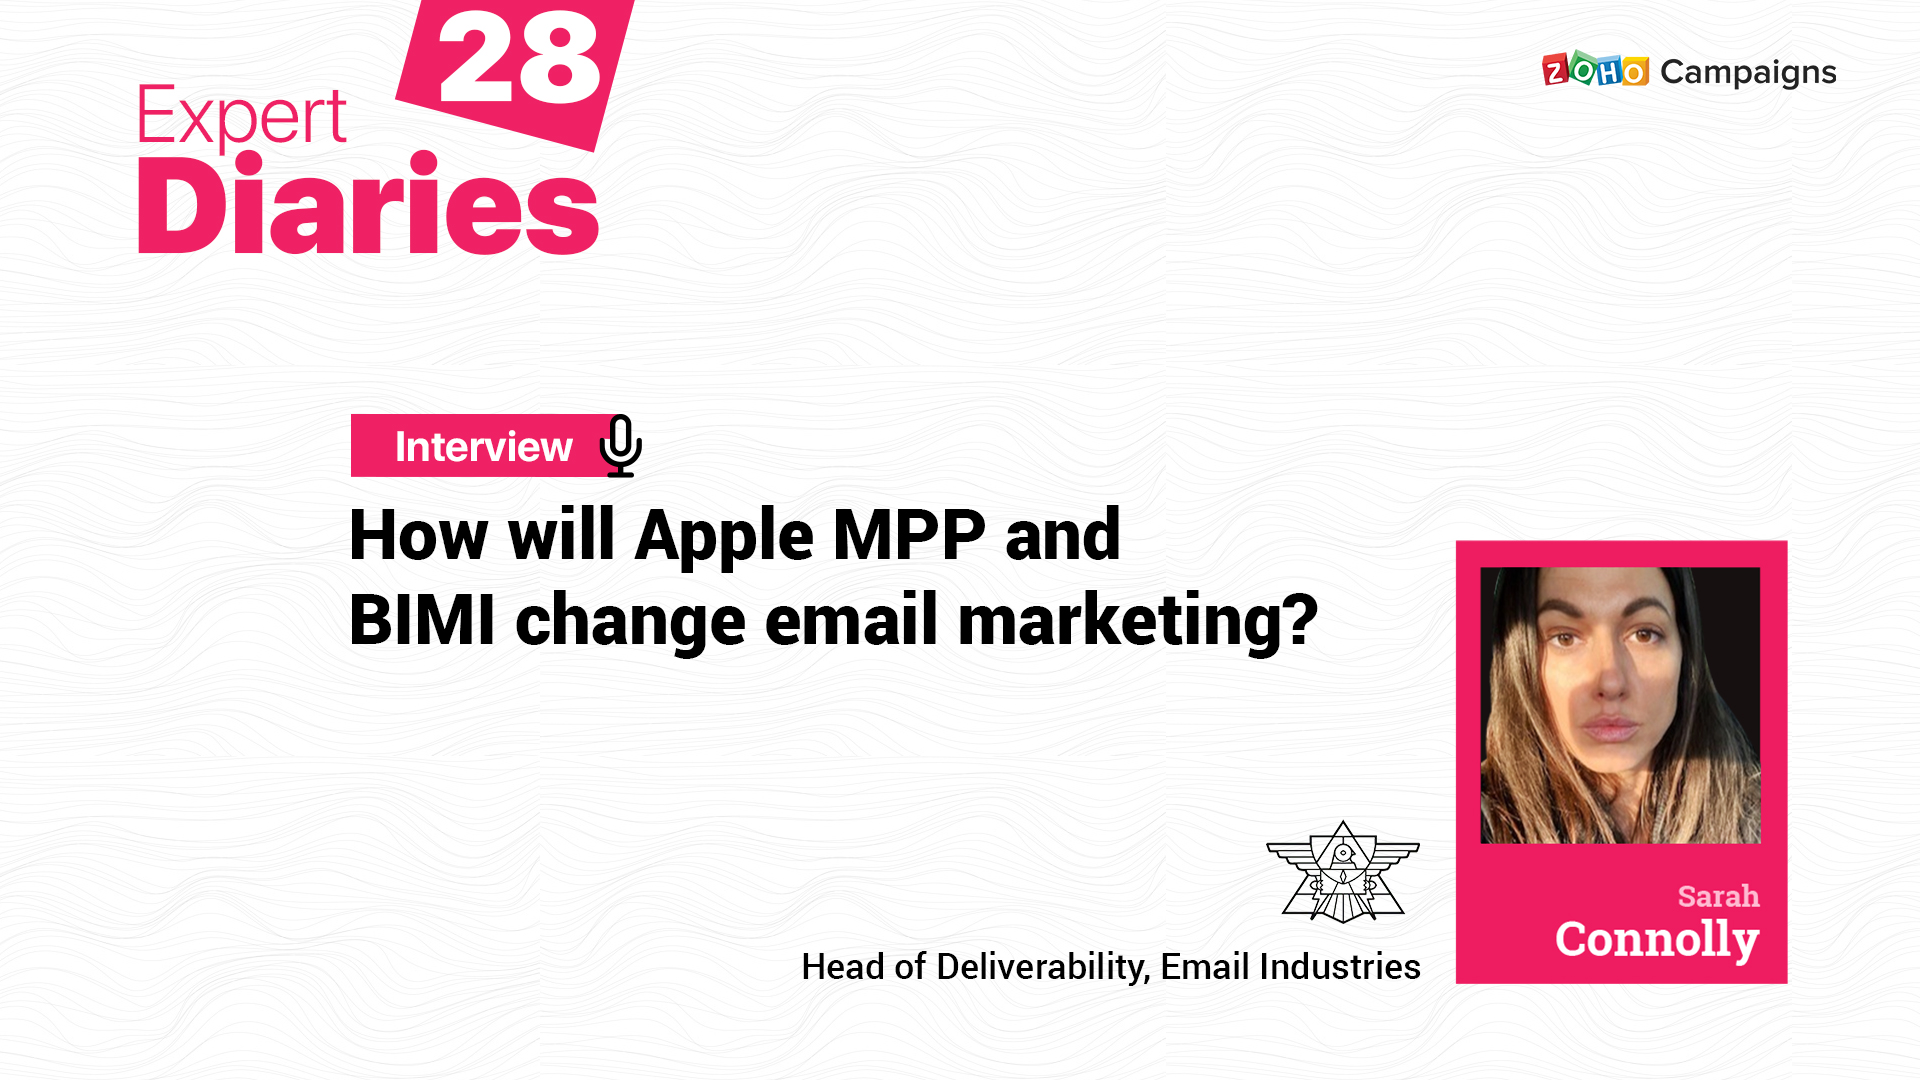 How will Apple MPP and BIMI change email marketing?